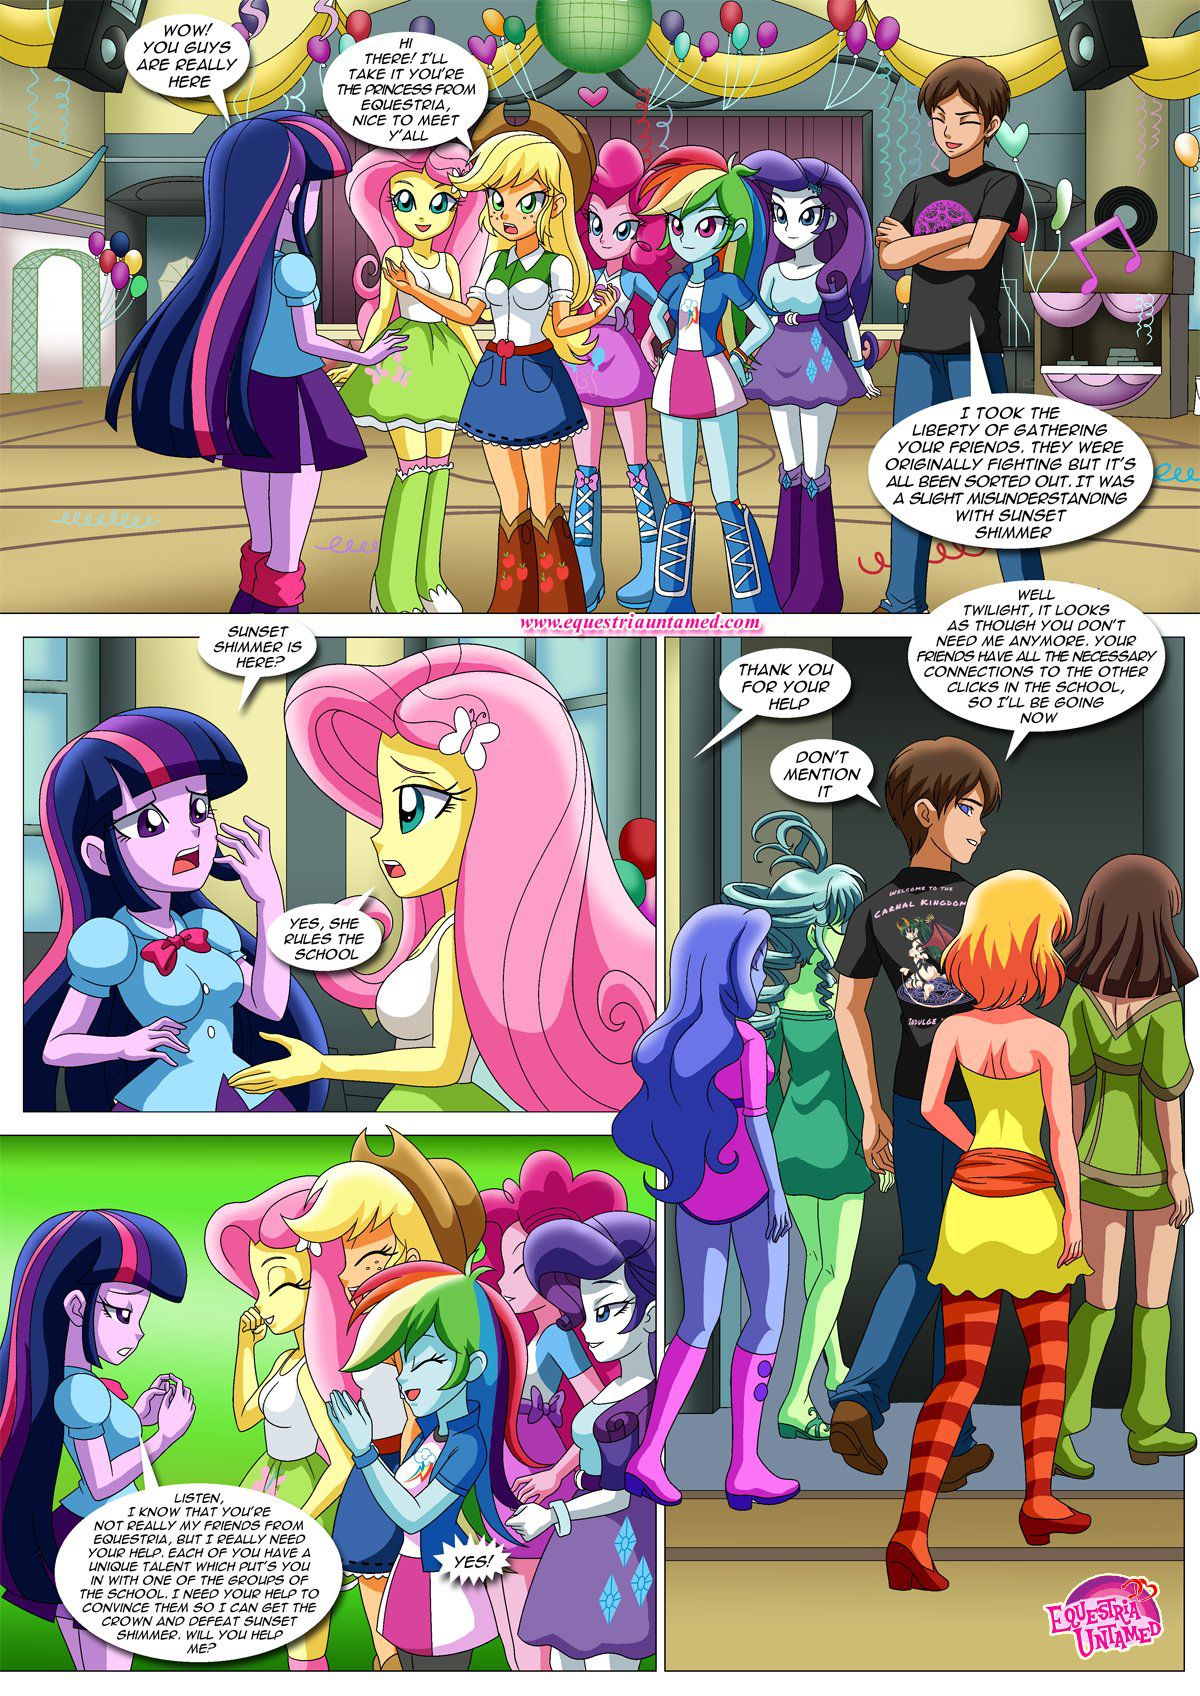 [Palcomix] Equestria Girls Unleashed (My Little Pony Friendship is Magic) [Ongoing] 6